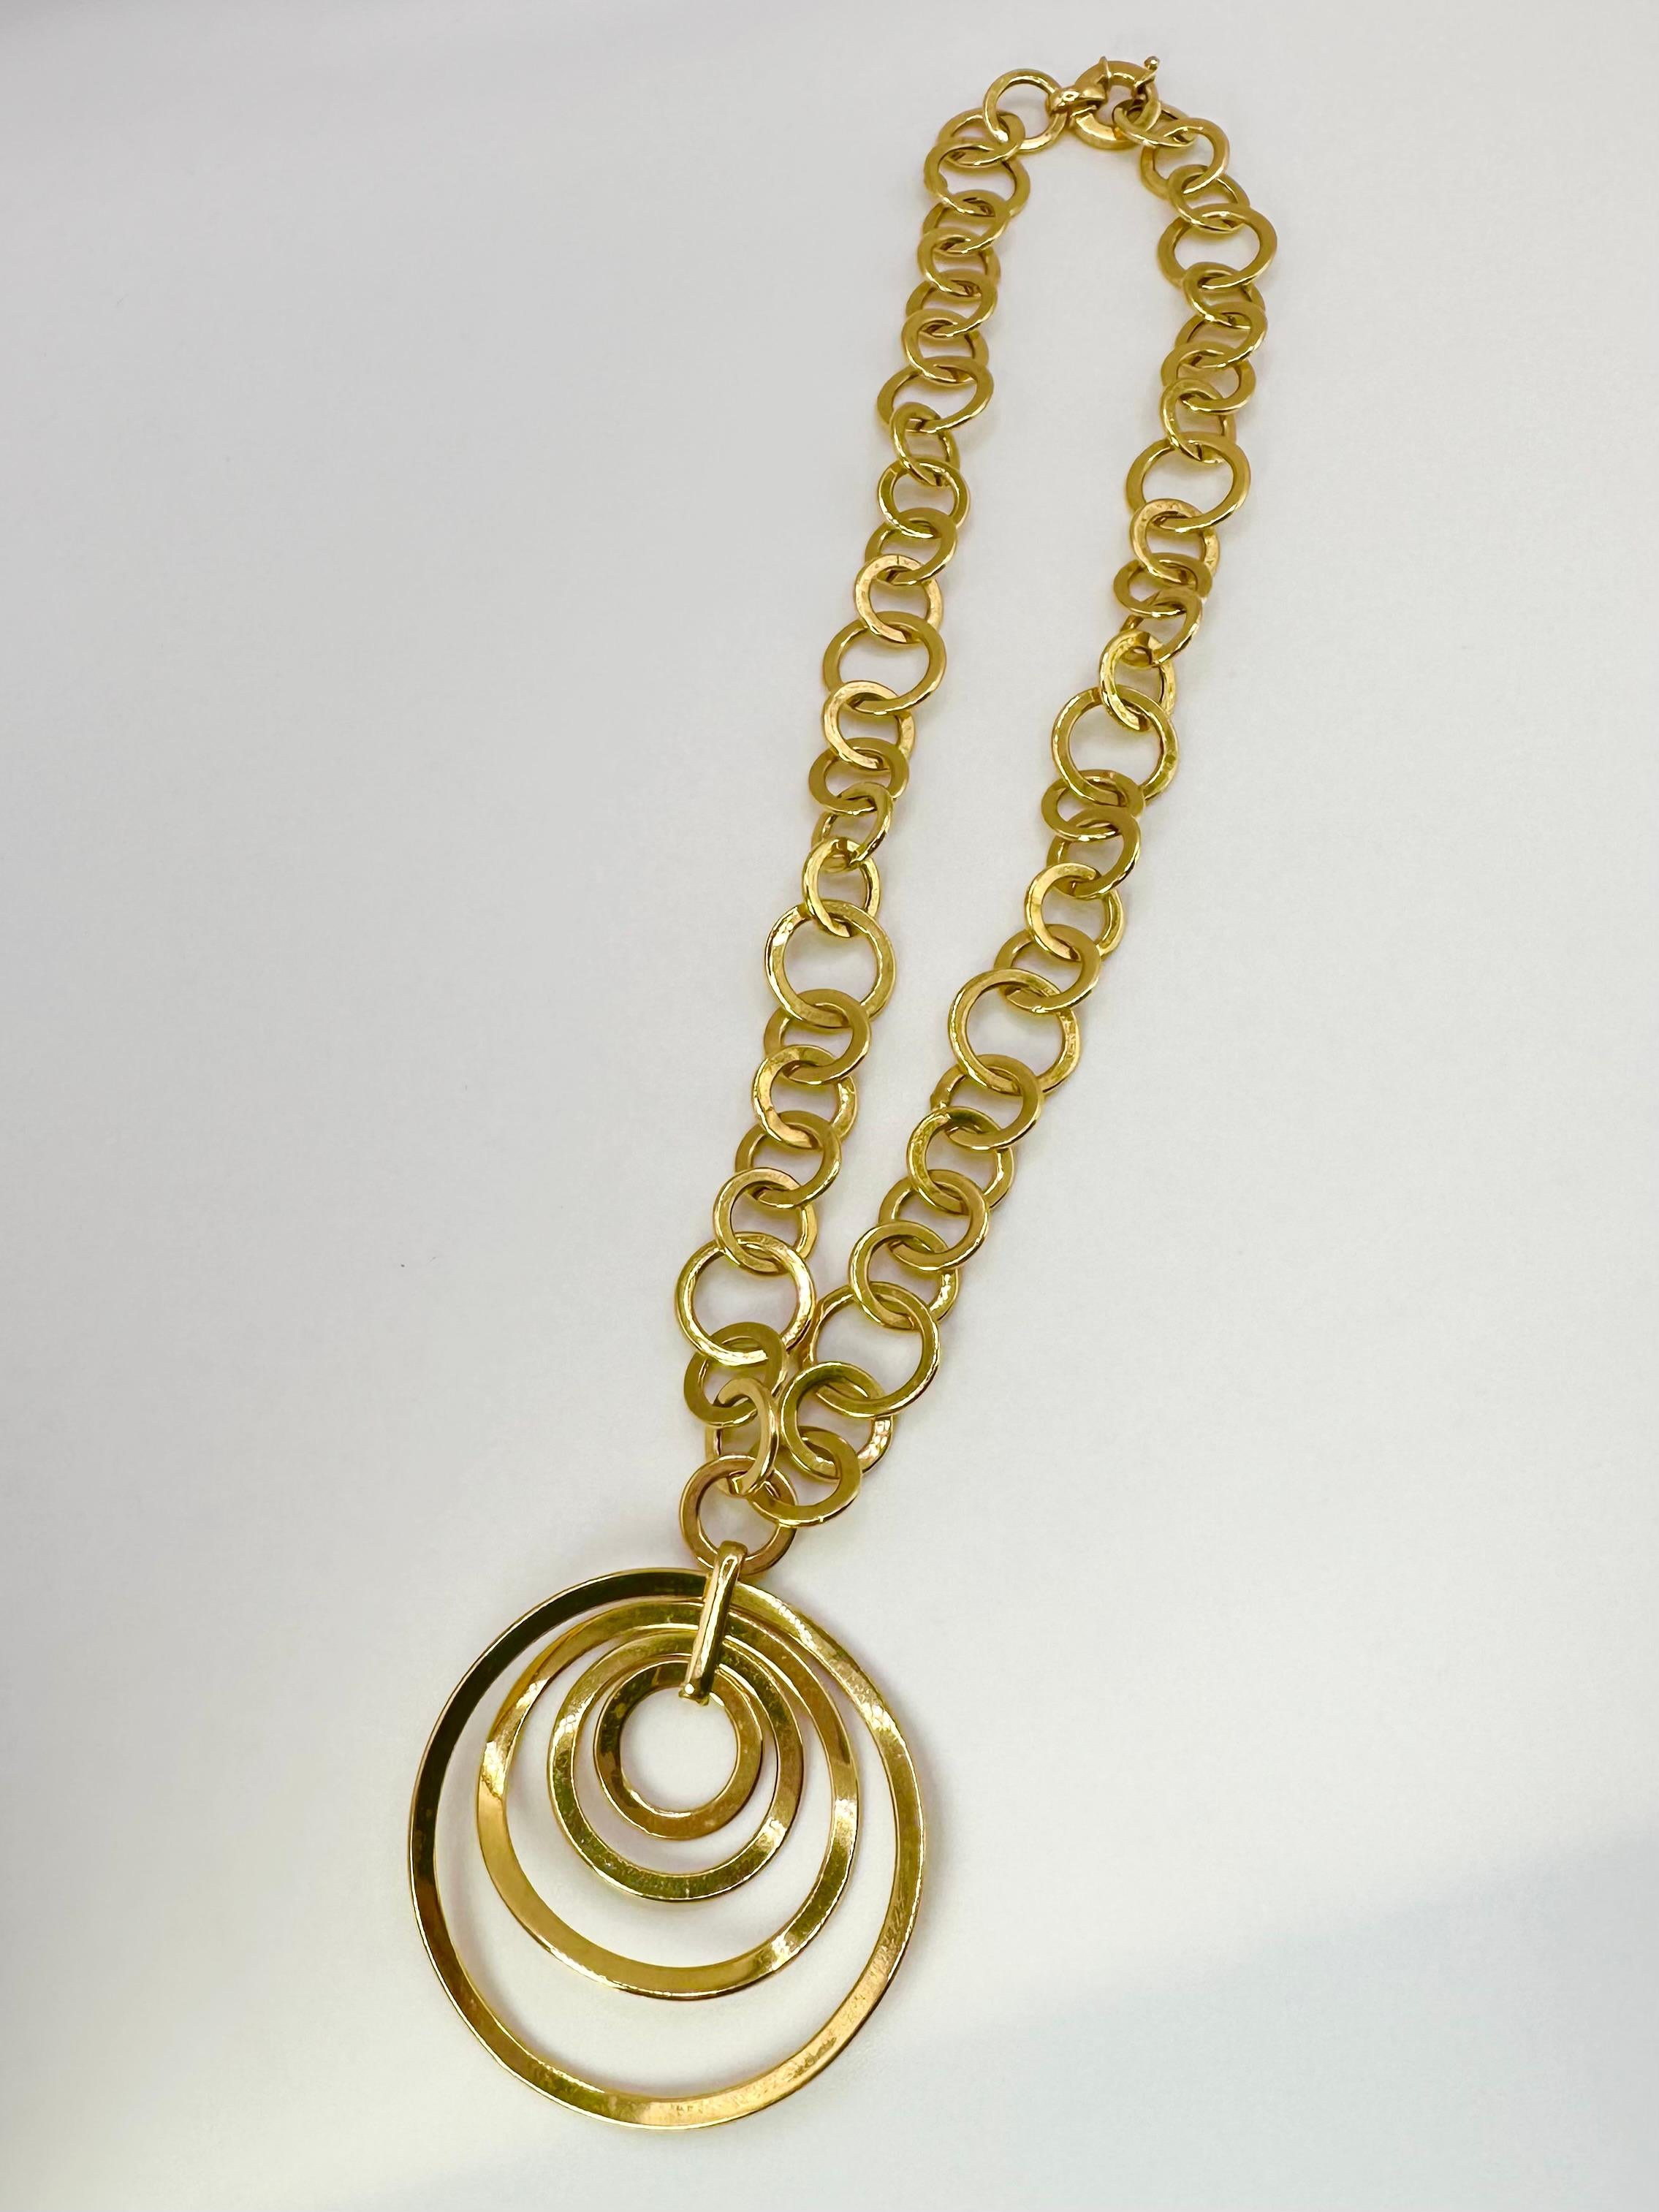 Fancy large circle necklace in 14kt yellow gold!

ITEM: AFT 431-00028 KOK
GRAM WEIGHT: 24.20
GOLD: 14KT gold
WIDTH: 15MM largest link
SIZE: 17”

WHAT YOU GET AT STAMPAR JEWELERS:
Stampar Jewelers, located in the heart of Jupiter, Florida, is a